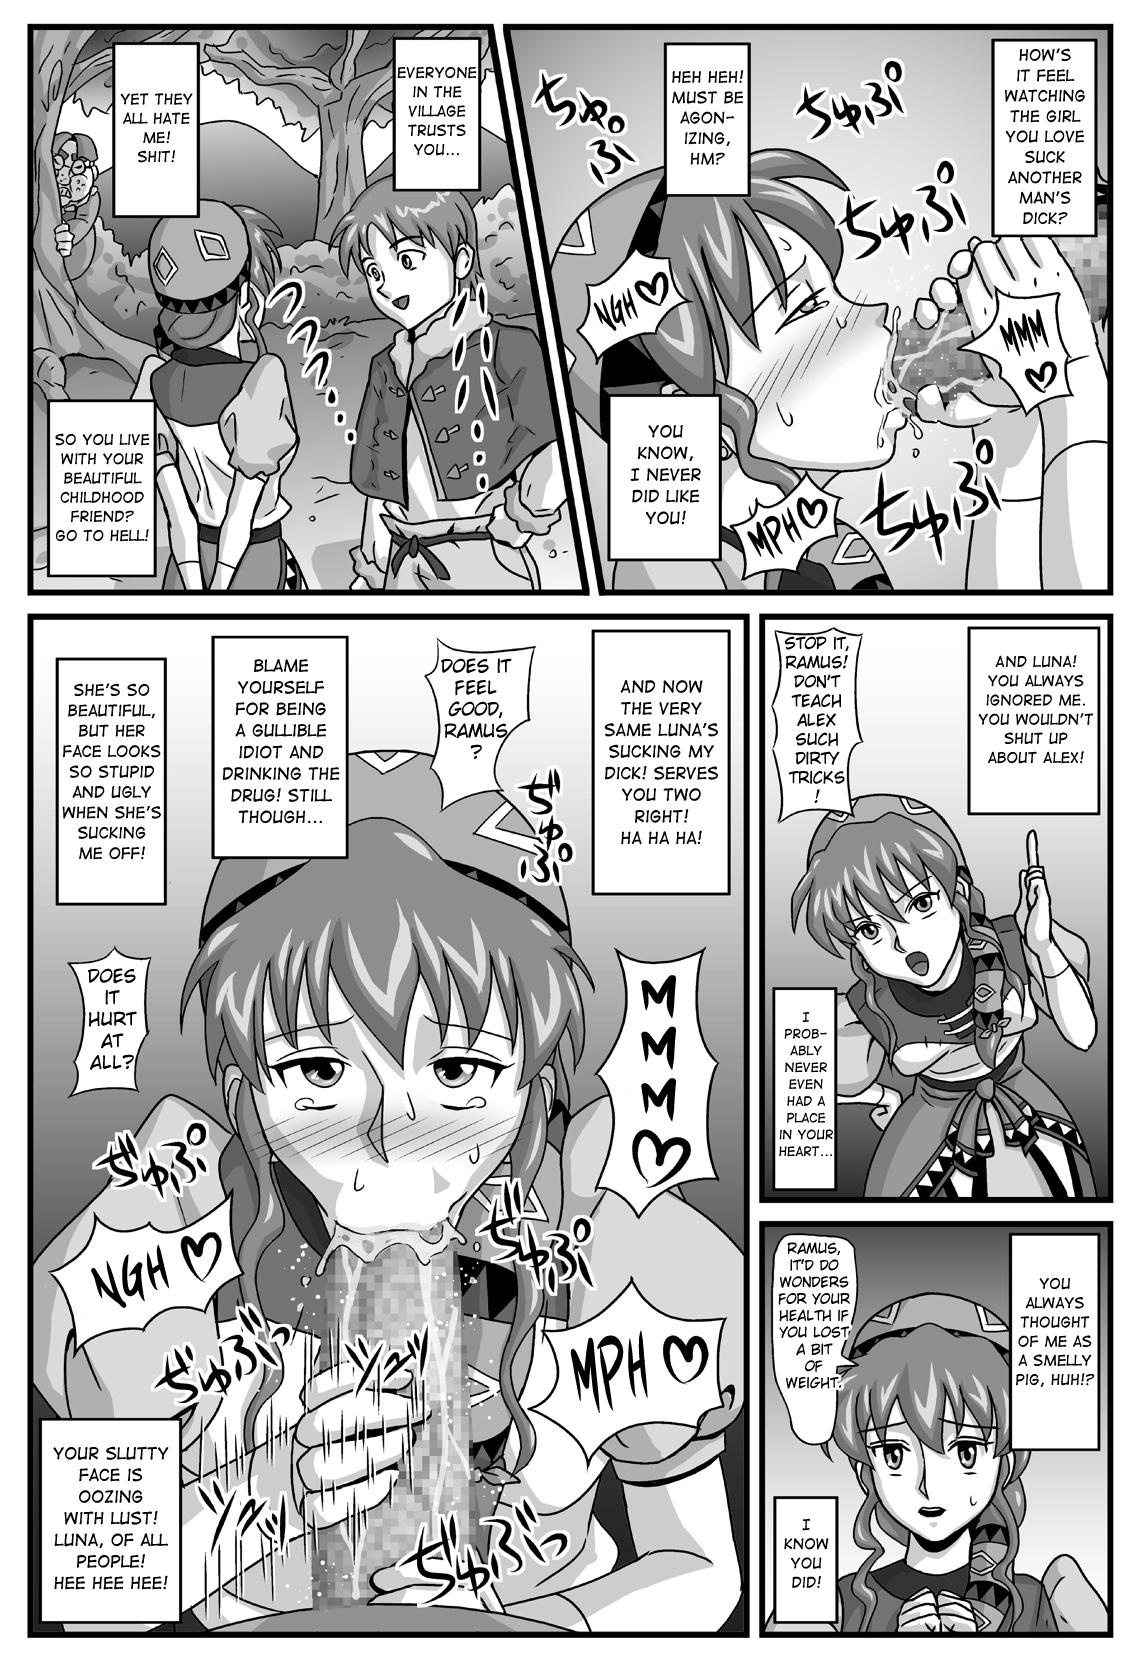 Suckingdick The Cumdumpster Princess of Burg 01 - Lunar silver star story Swallowing - Page 9